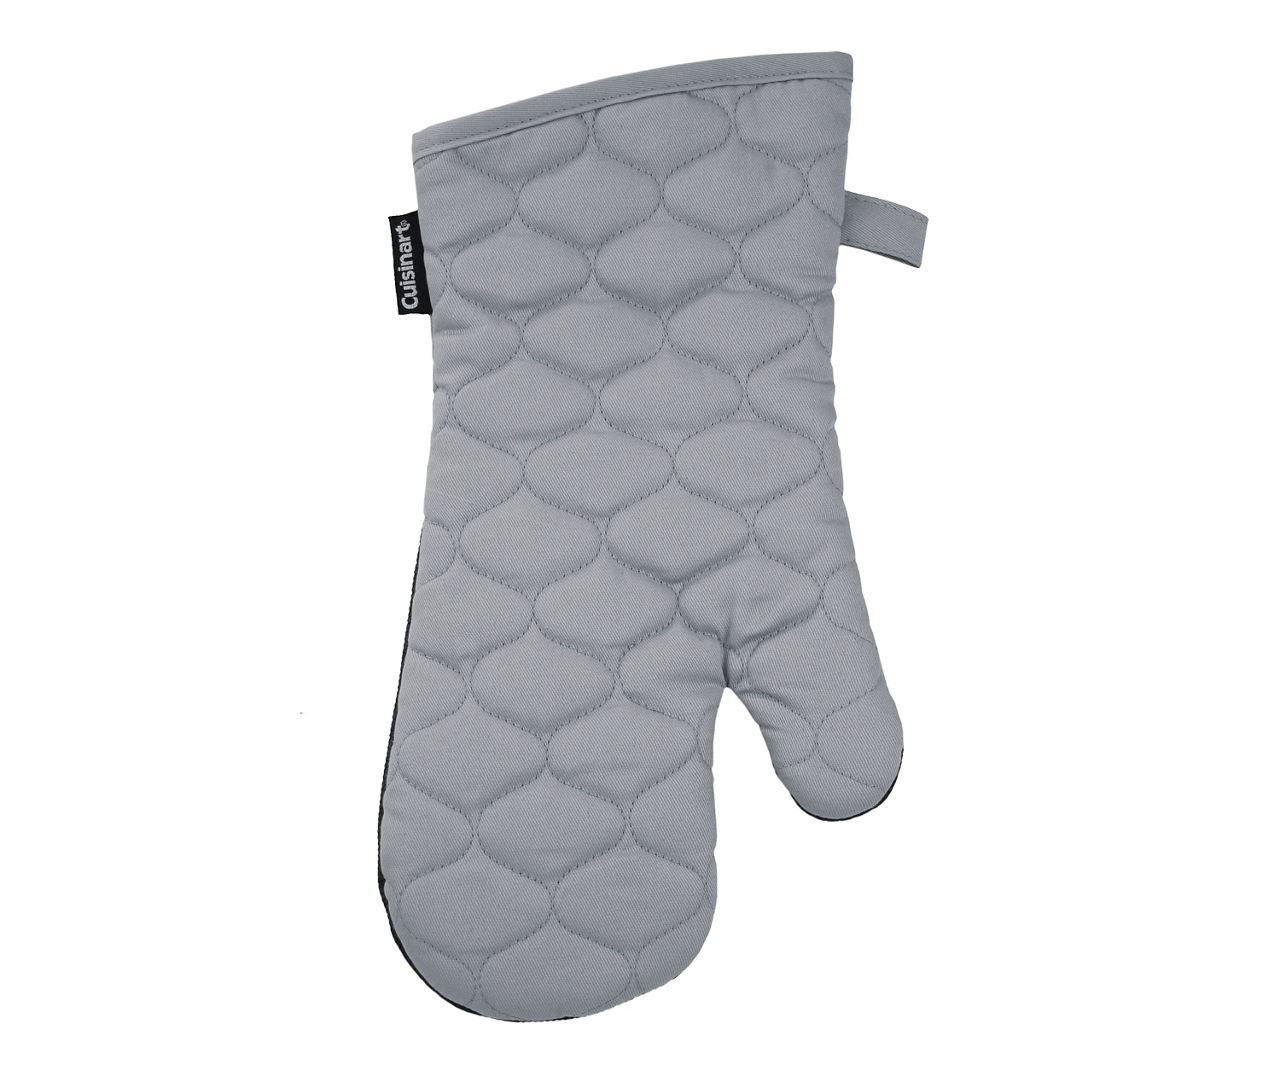 CUISINART OVEN MITT AND POT HOLDER SET GRAY BLACK SILICONE NWT